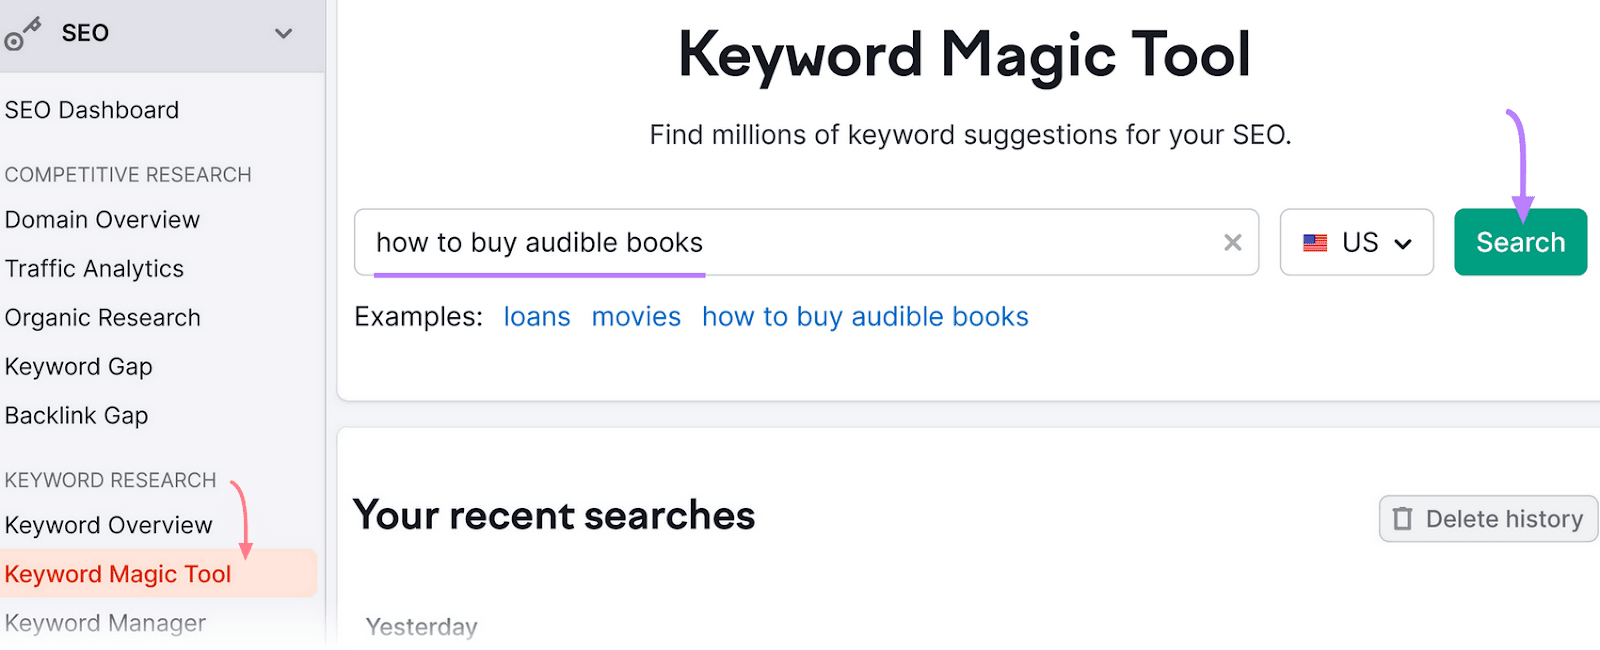 Keyword Magic Tool, with "how to buy audible books" in the text box, the "Search" button highlighted with a purple arrow.